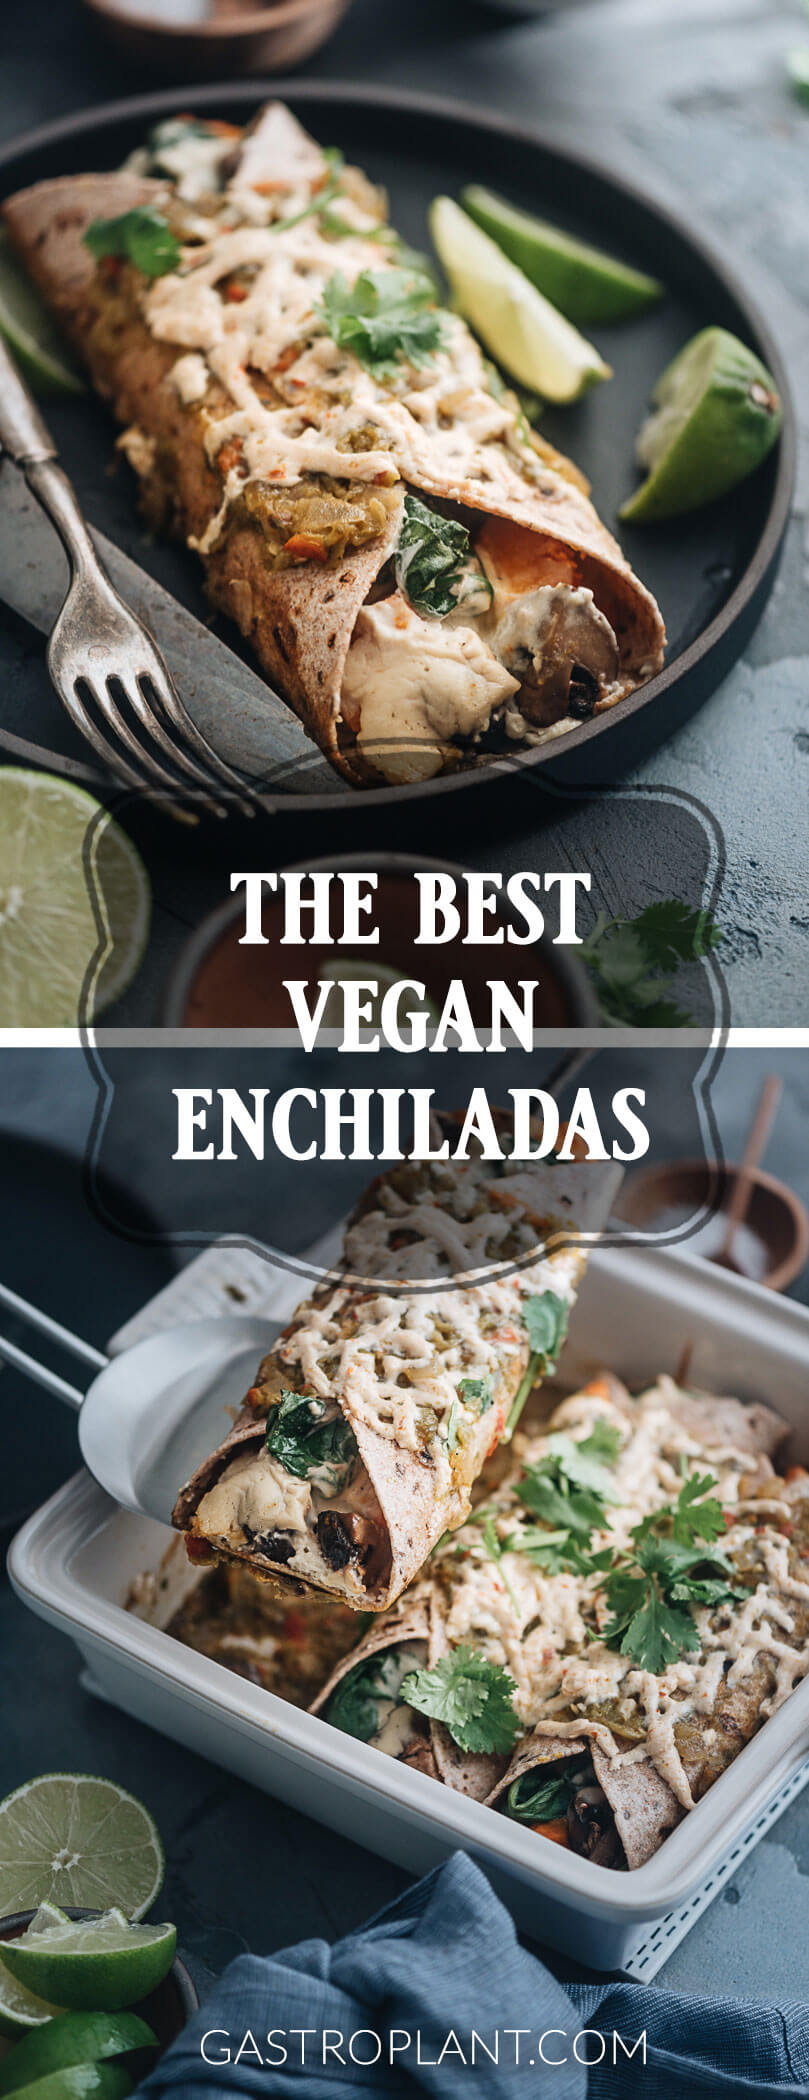 Vegan enchiladas - Roast winter squash, mushrooms, and spinach drizzled with cashew creme, all wrapped in tortillas and topped with green chile sauce – these enchiladas combine serious flavor and nourishment. They’re indulgent-tasting yet full of plant-based goodness.